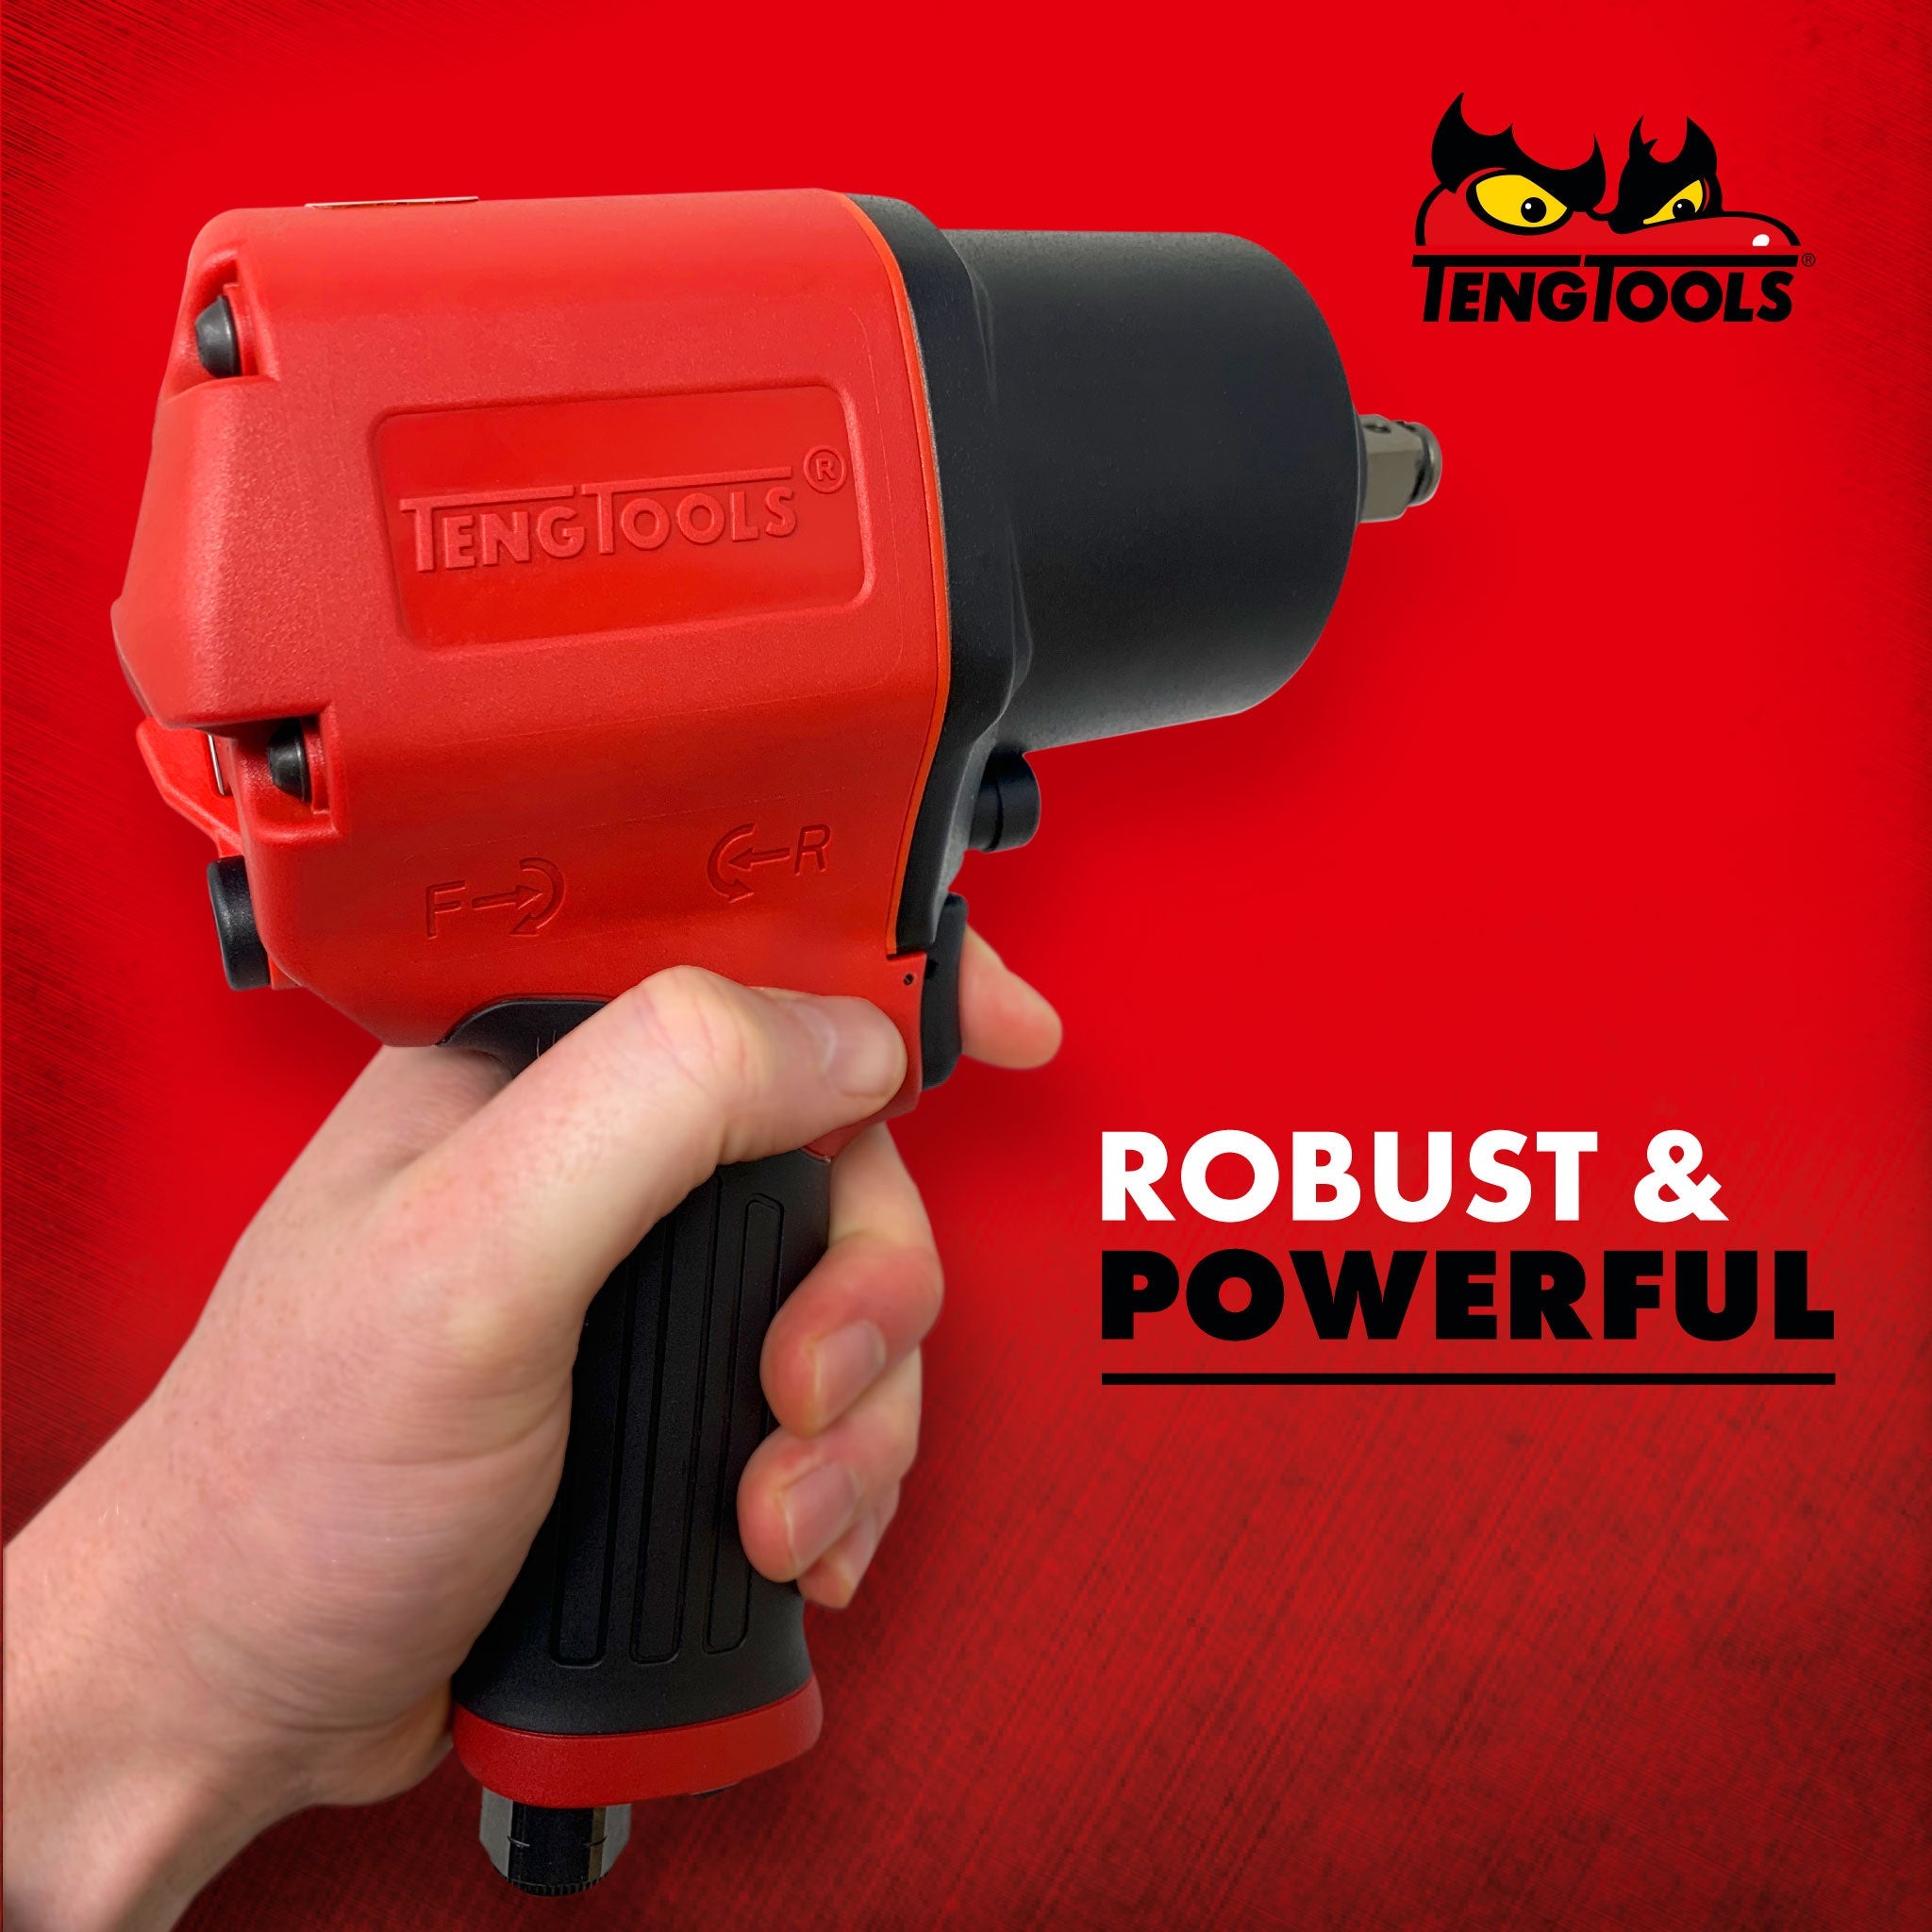 Teng Tools 1/2 Inch Square Drive Reversible High Torque Composite Air Impact Wrench Gun - ARWC12